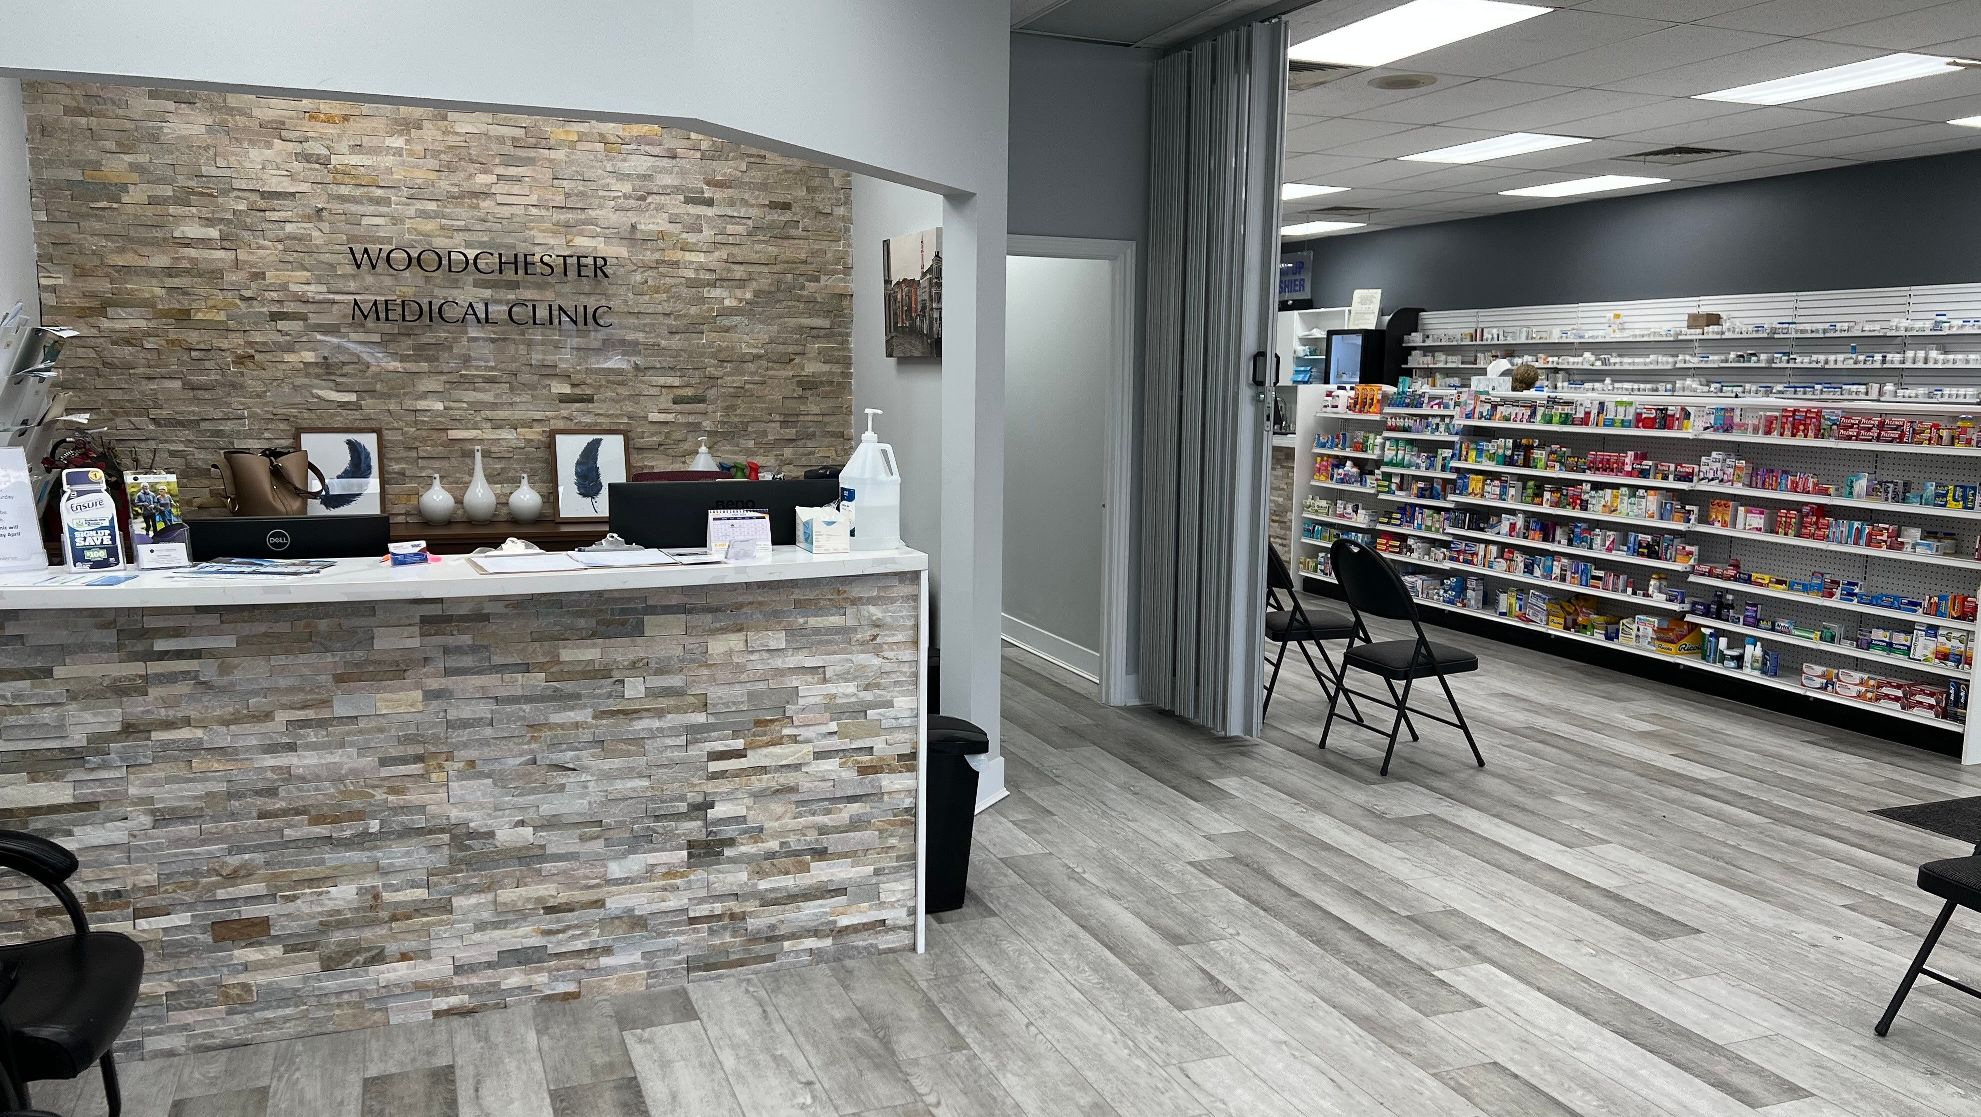 Woodchester Medical Clinic mississauga